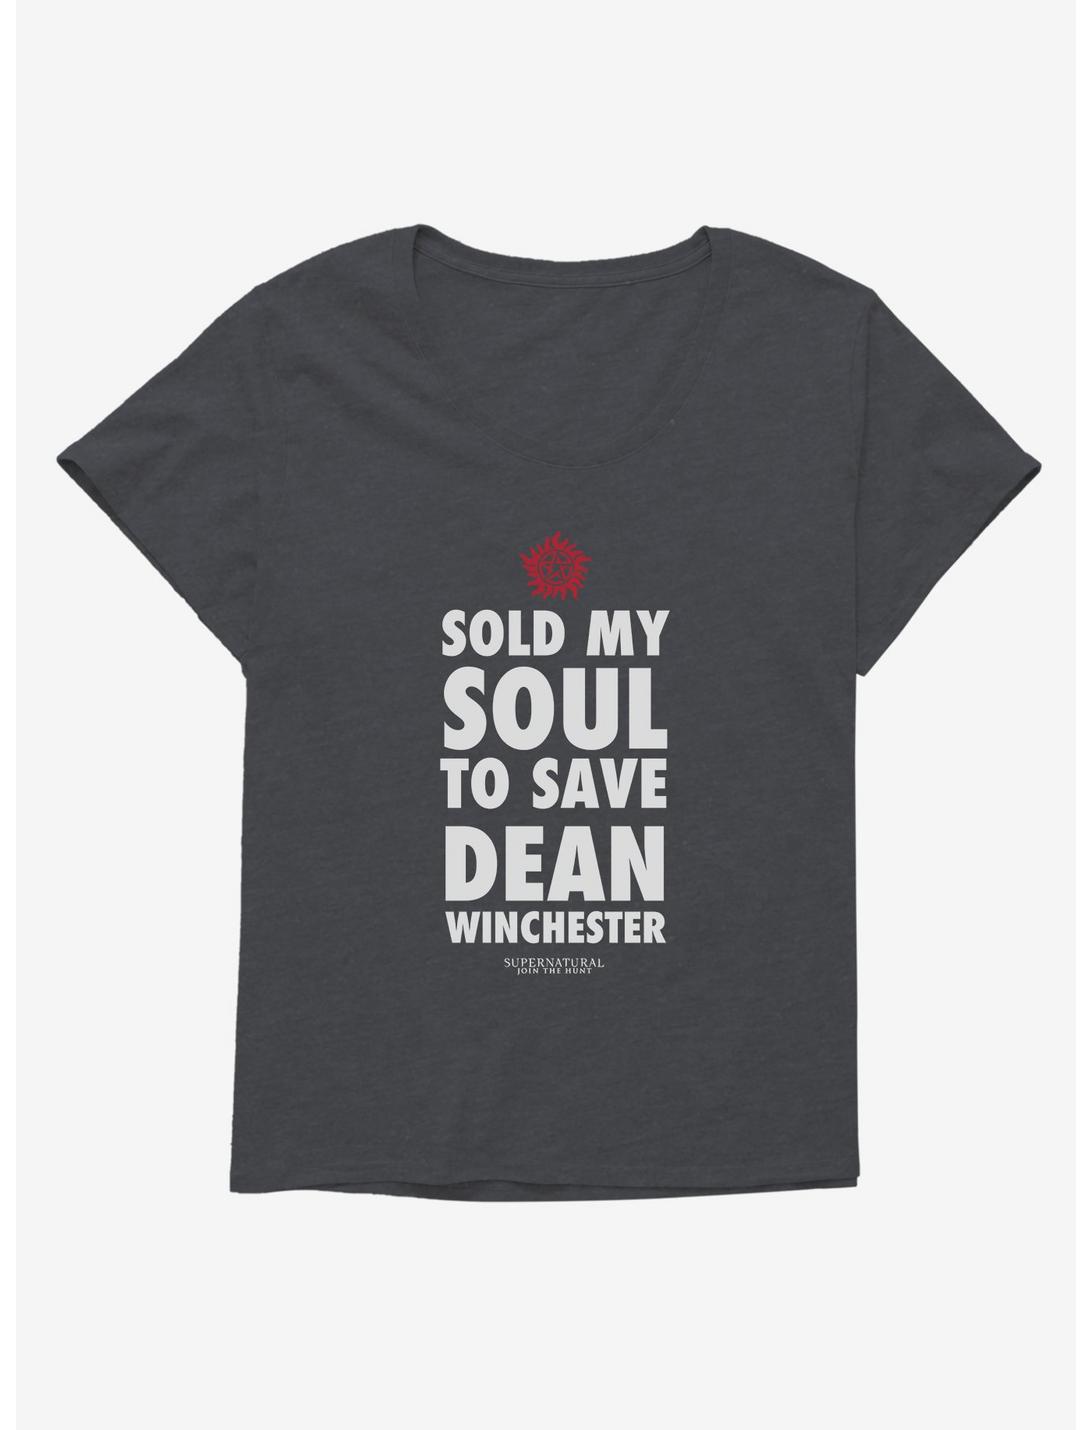 Supernatural Sold My Soul To Save Dean Winchester Girls Plus Size T-Shirt, , hi-res